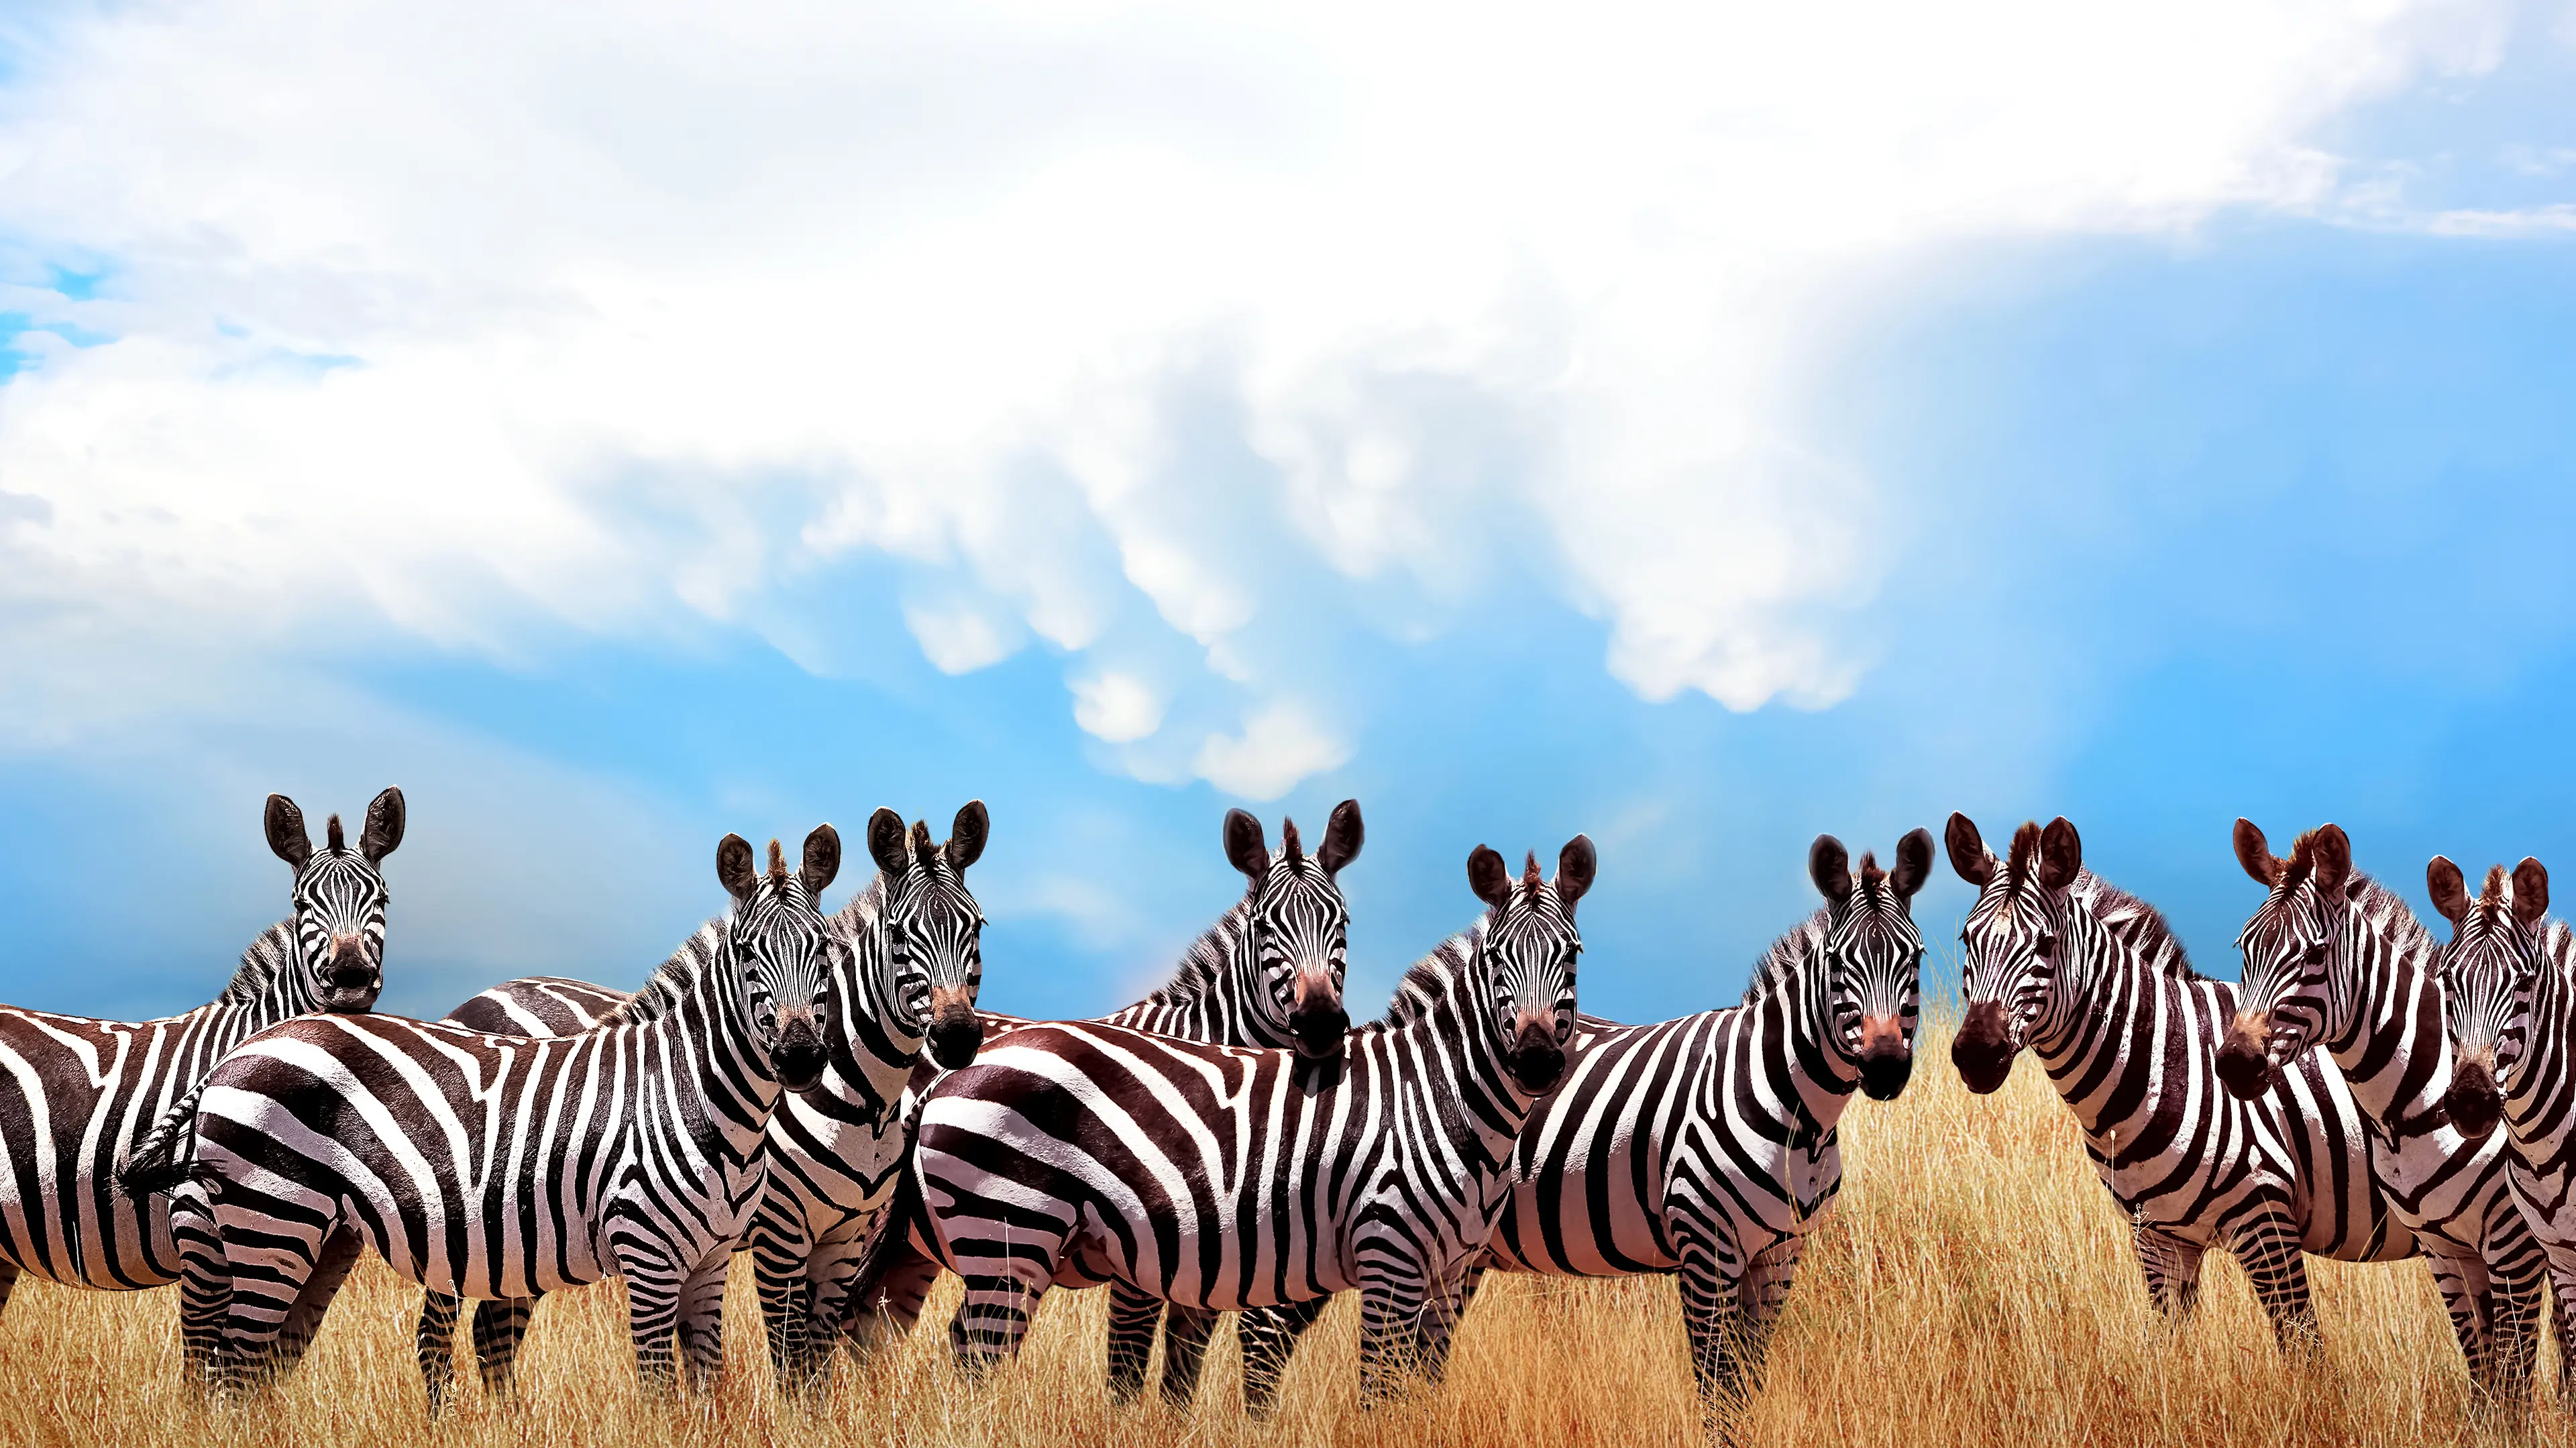 Group of wild zebras in the African savannah